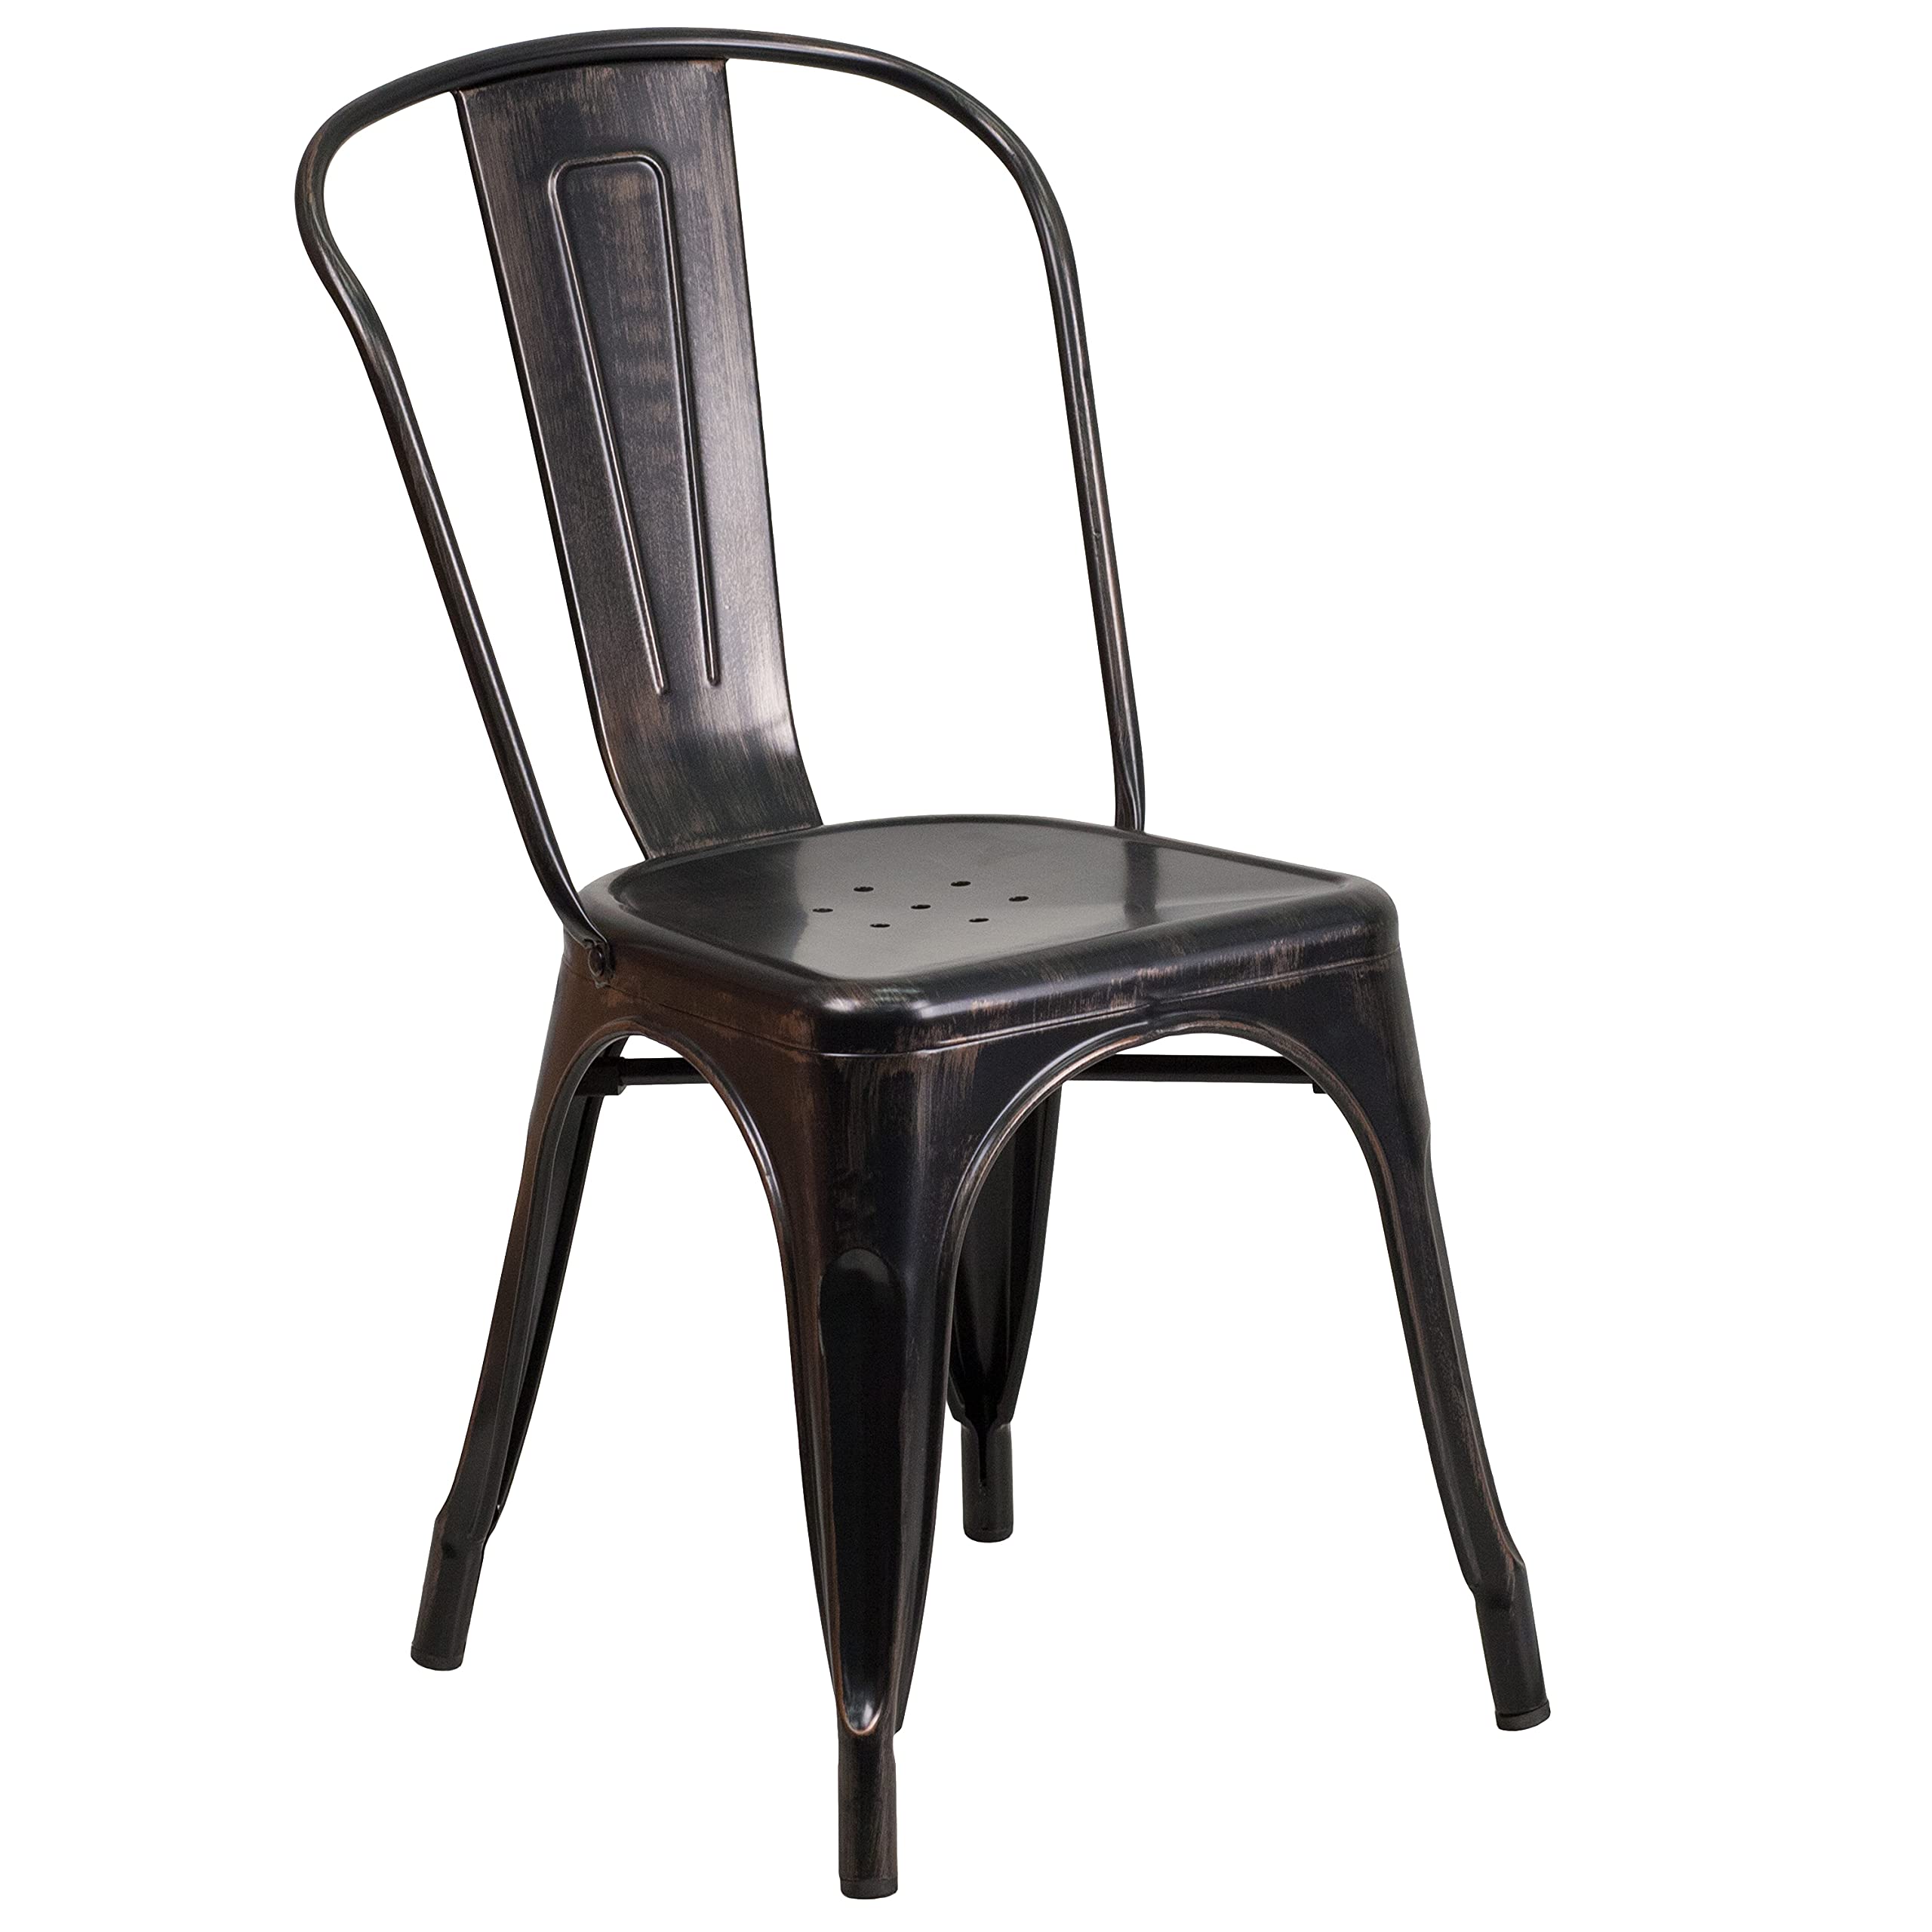 Merrick Lane Amsterdam Black-Antique Gold Metal Dining Chair with Curved Vertical Slatted Back and Square Seat